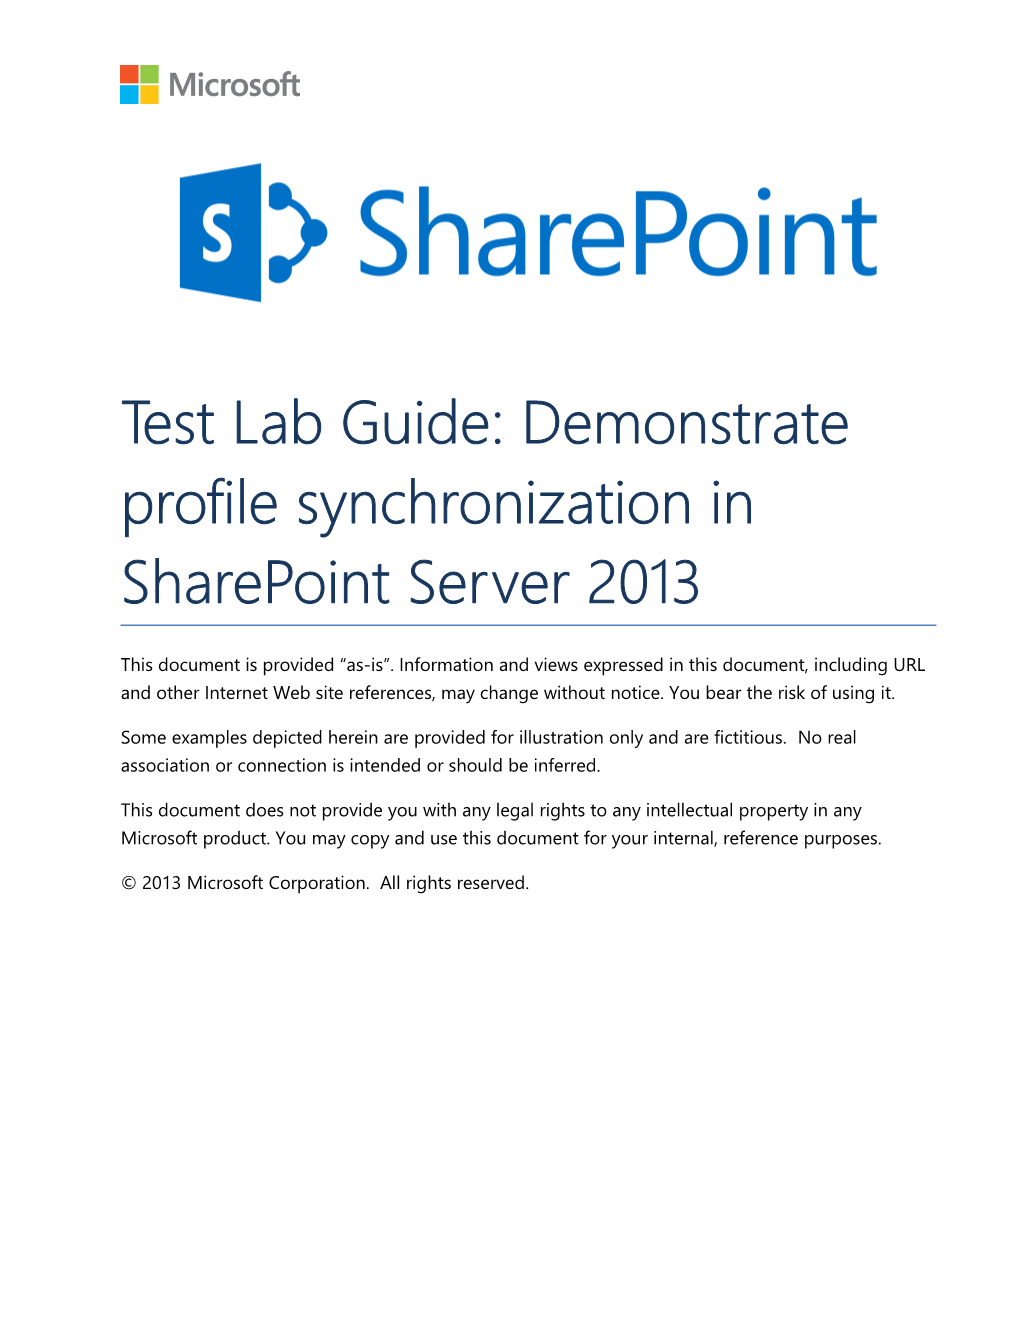 Test Lab Guide: Demonstrate Profilesynchronization in Sharepoint Server 2013